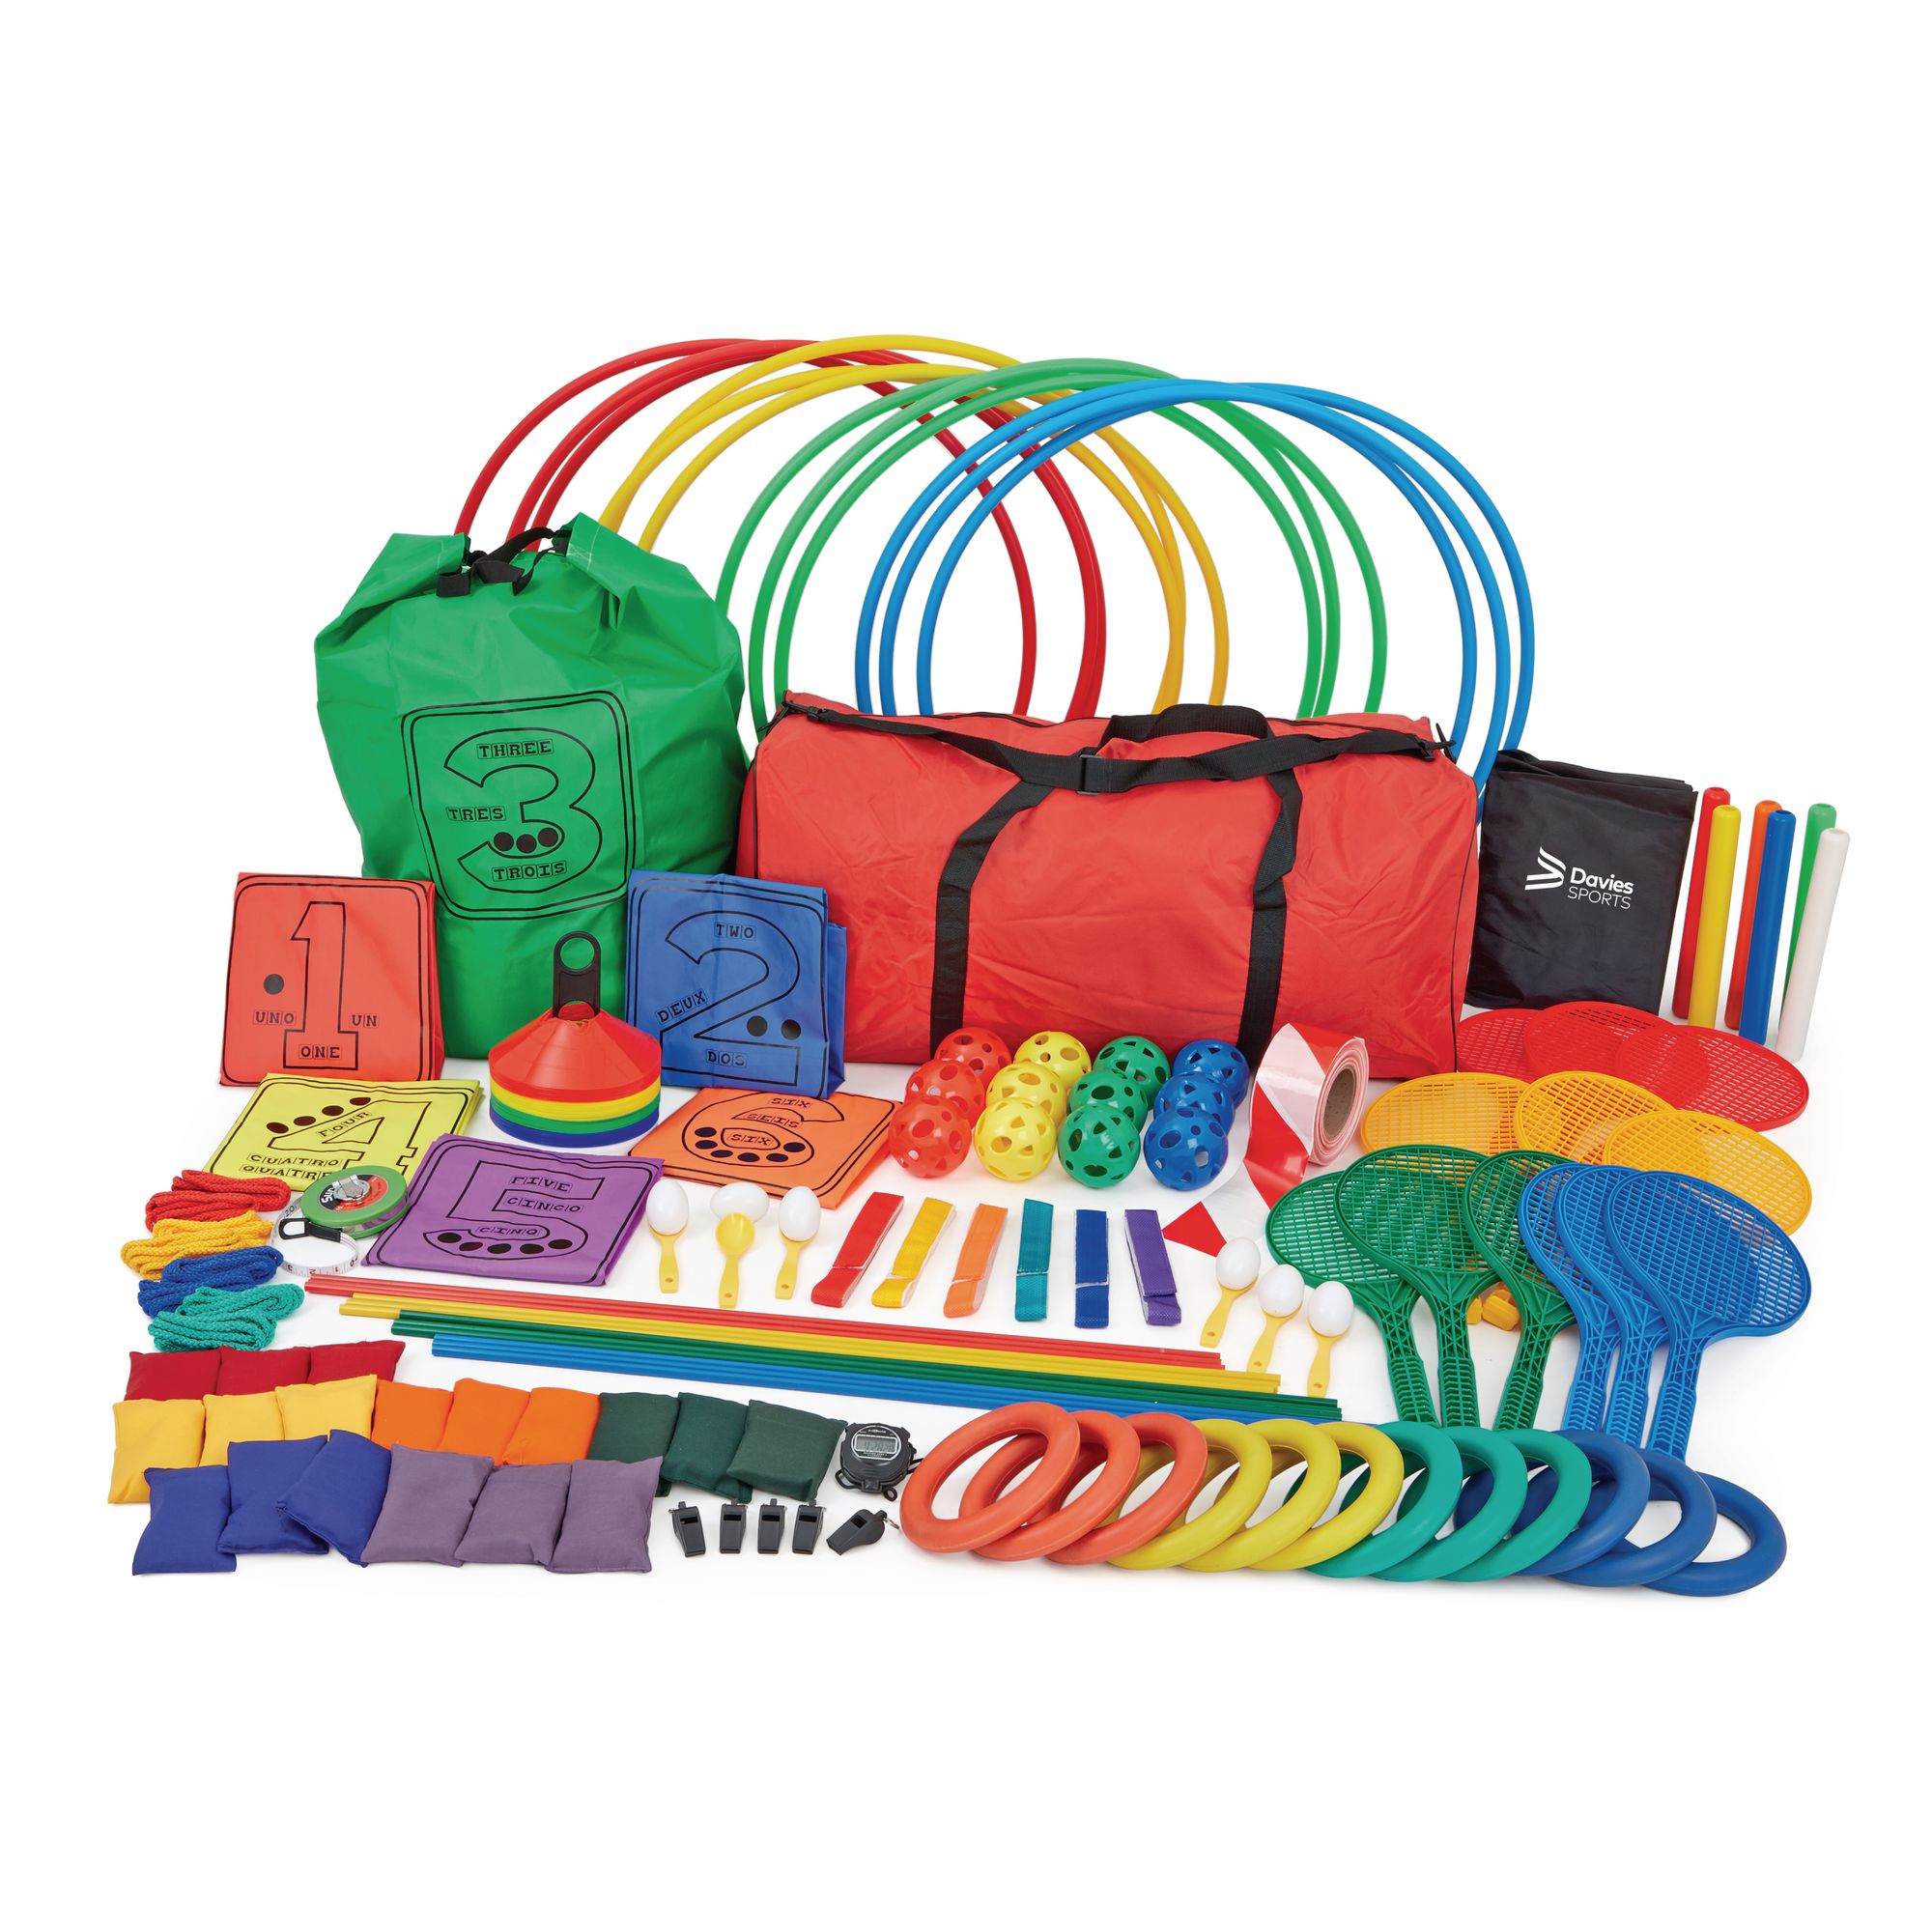 Primary Sports Day Pack